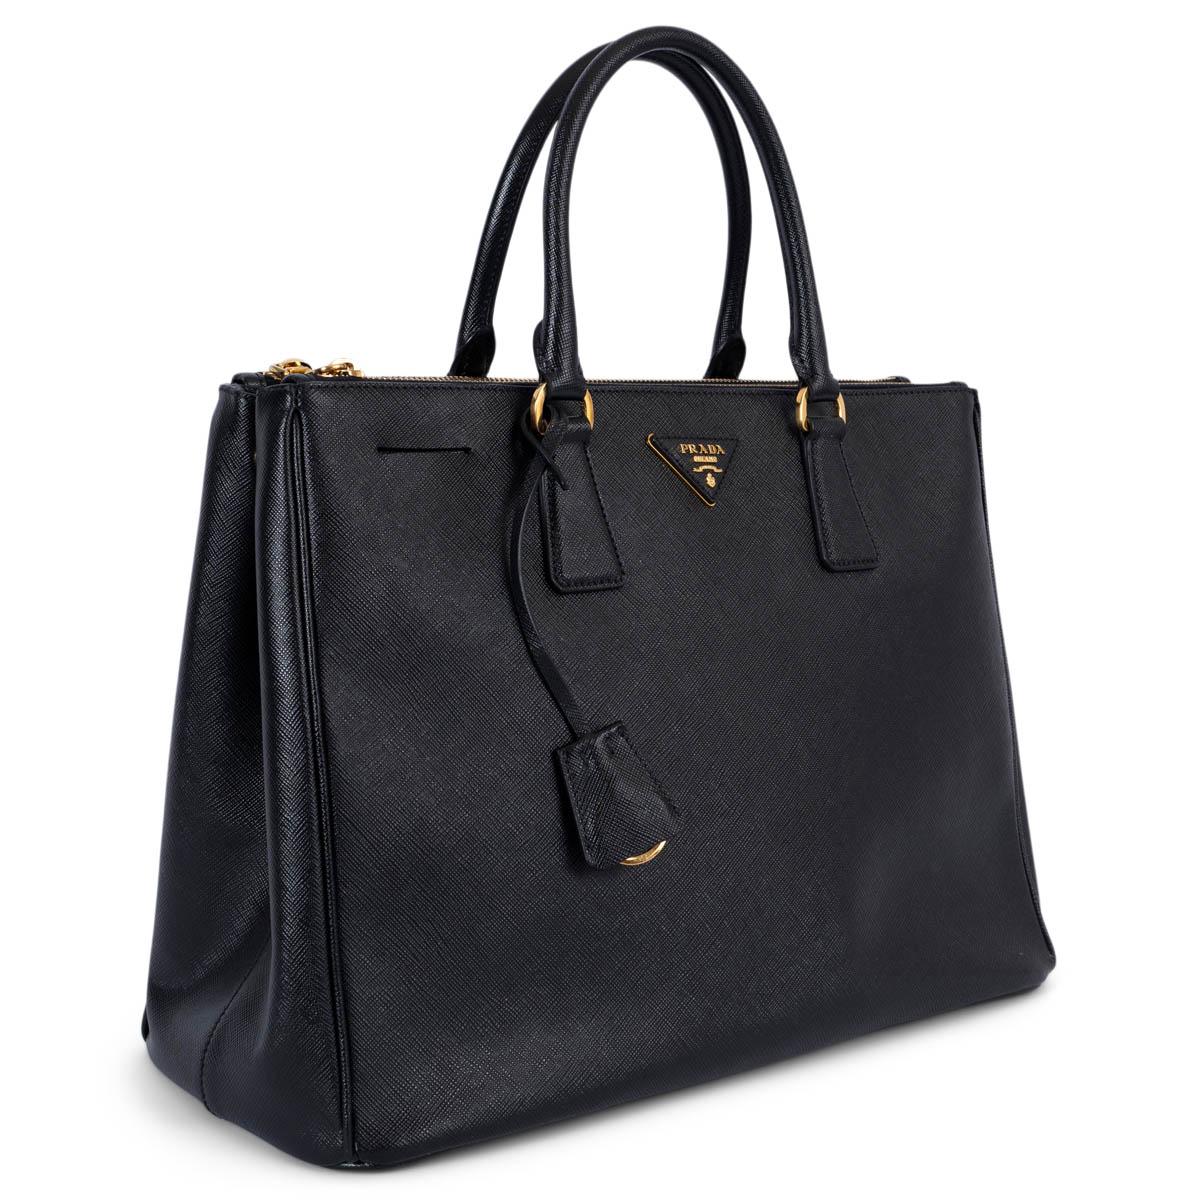 100% authentic Prada Large Galleria handbag in black Saffiano leather featuring gold-tone hardware. Lined in black monogram nylon and divided in three compartments, the two outside ones close with a zipper. The middle part has one zipper pocket